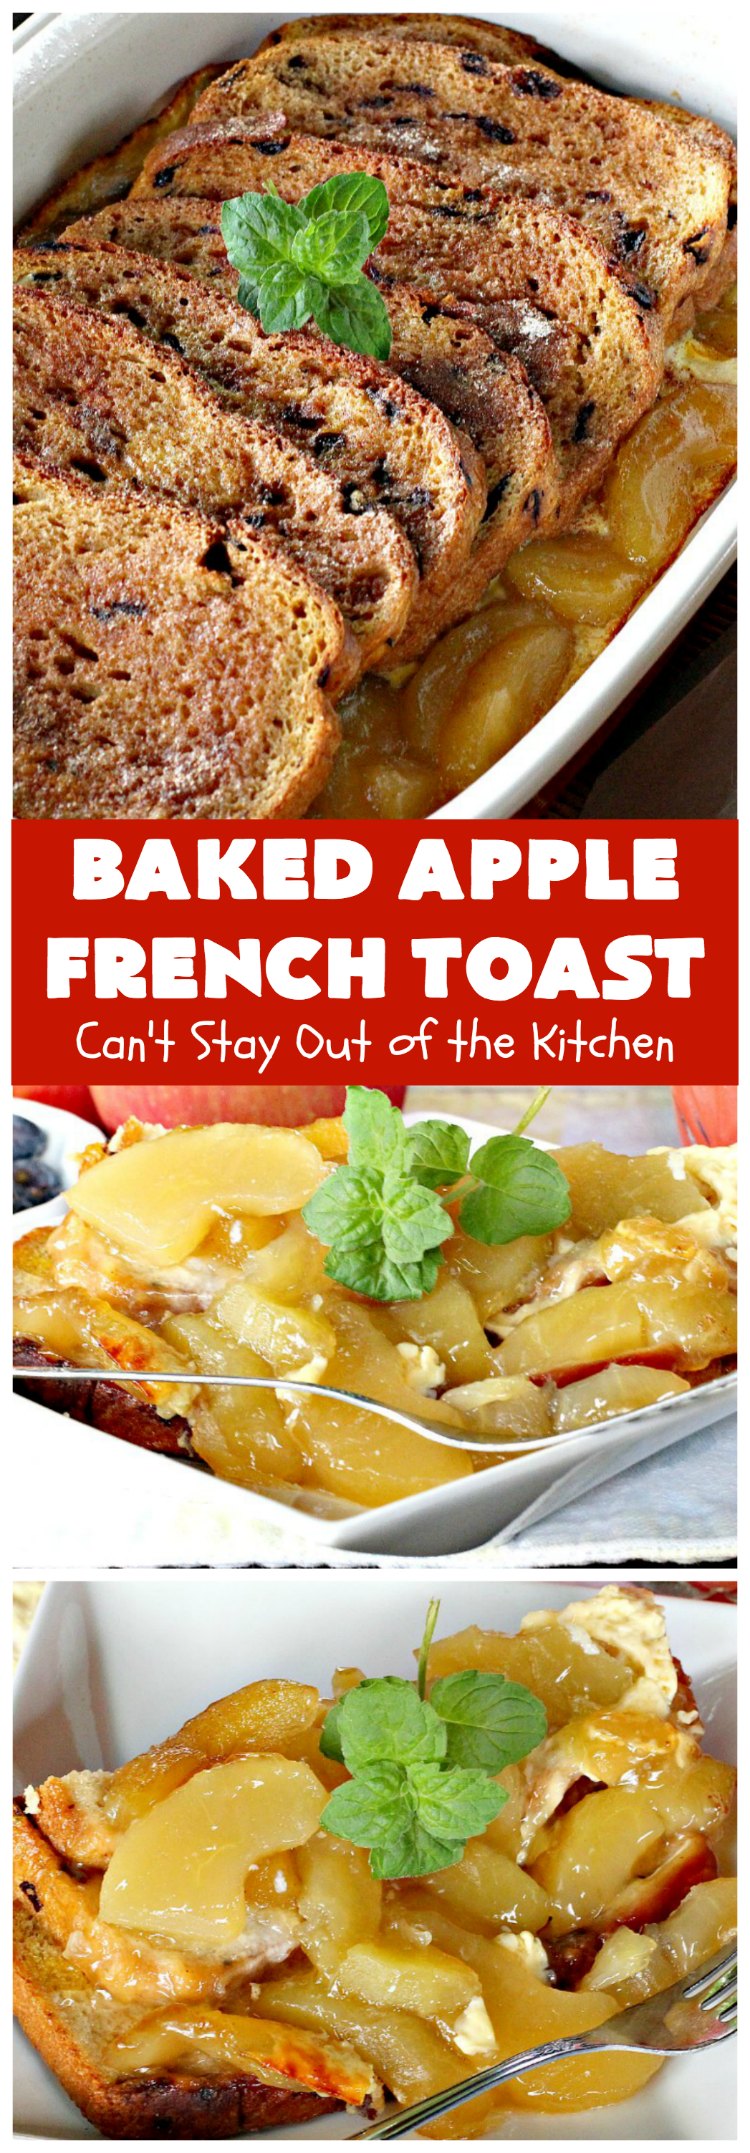 Baked Apple French Toast | Can't Stay Out of the Kitchen